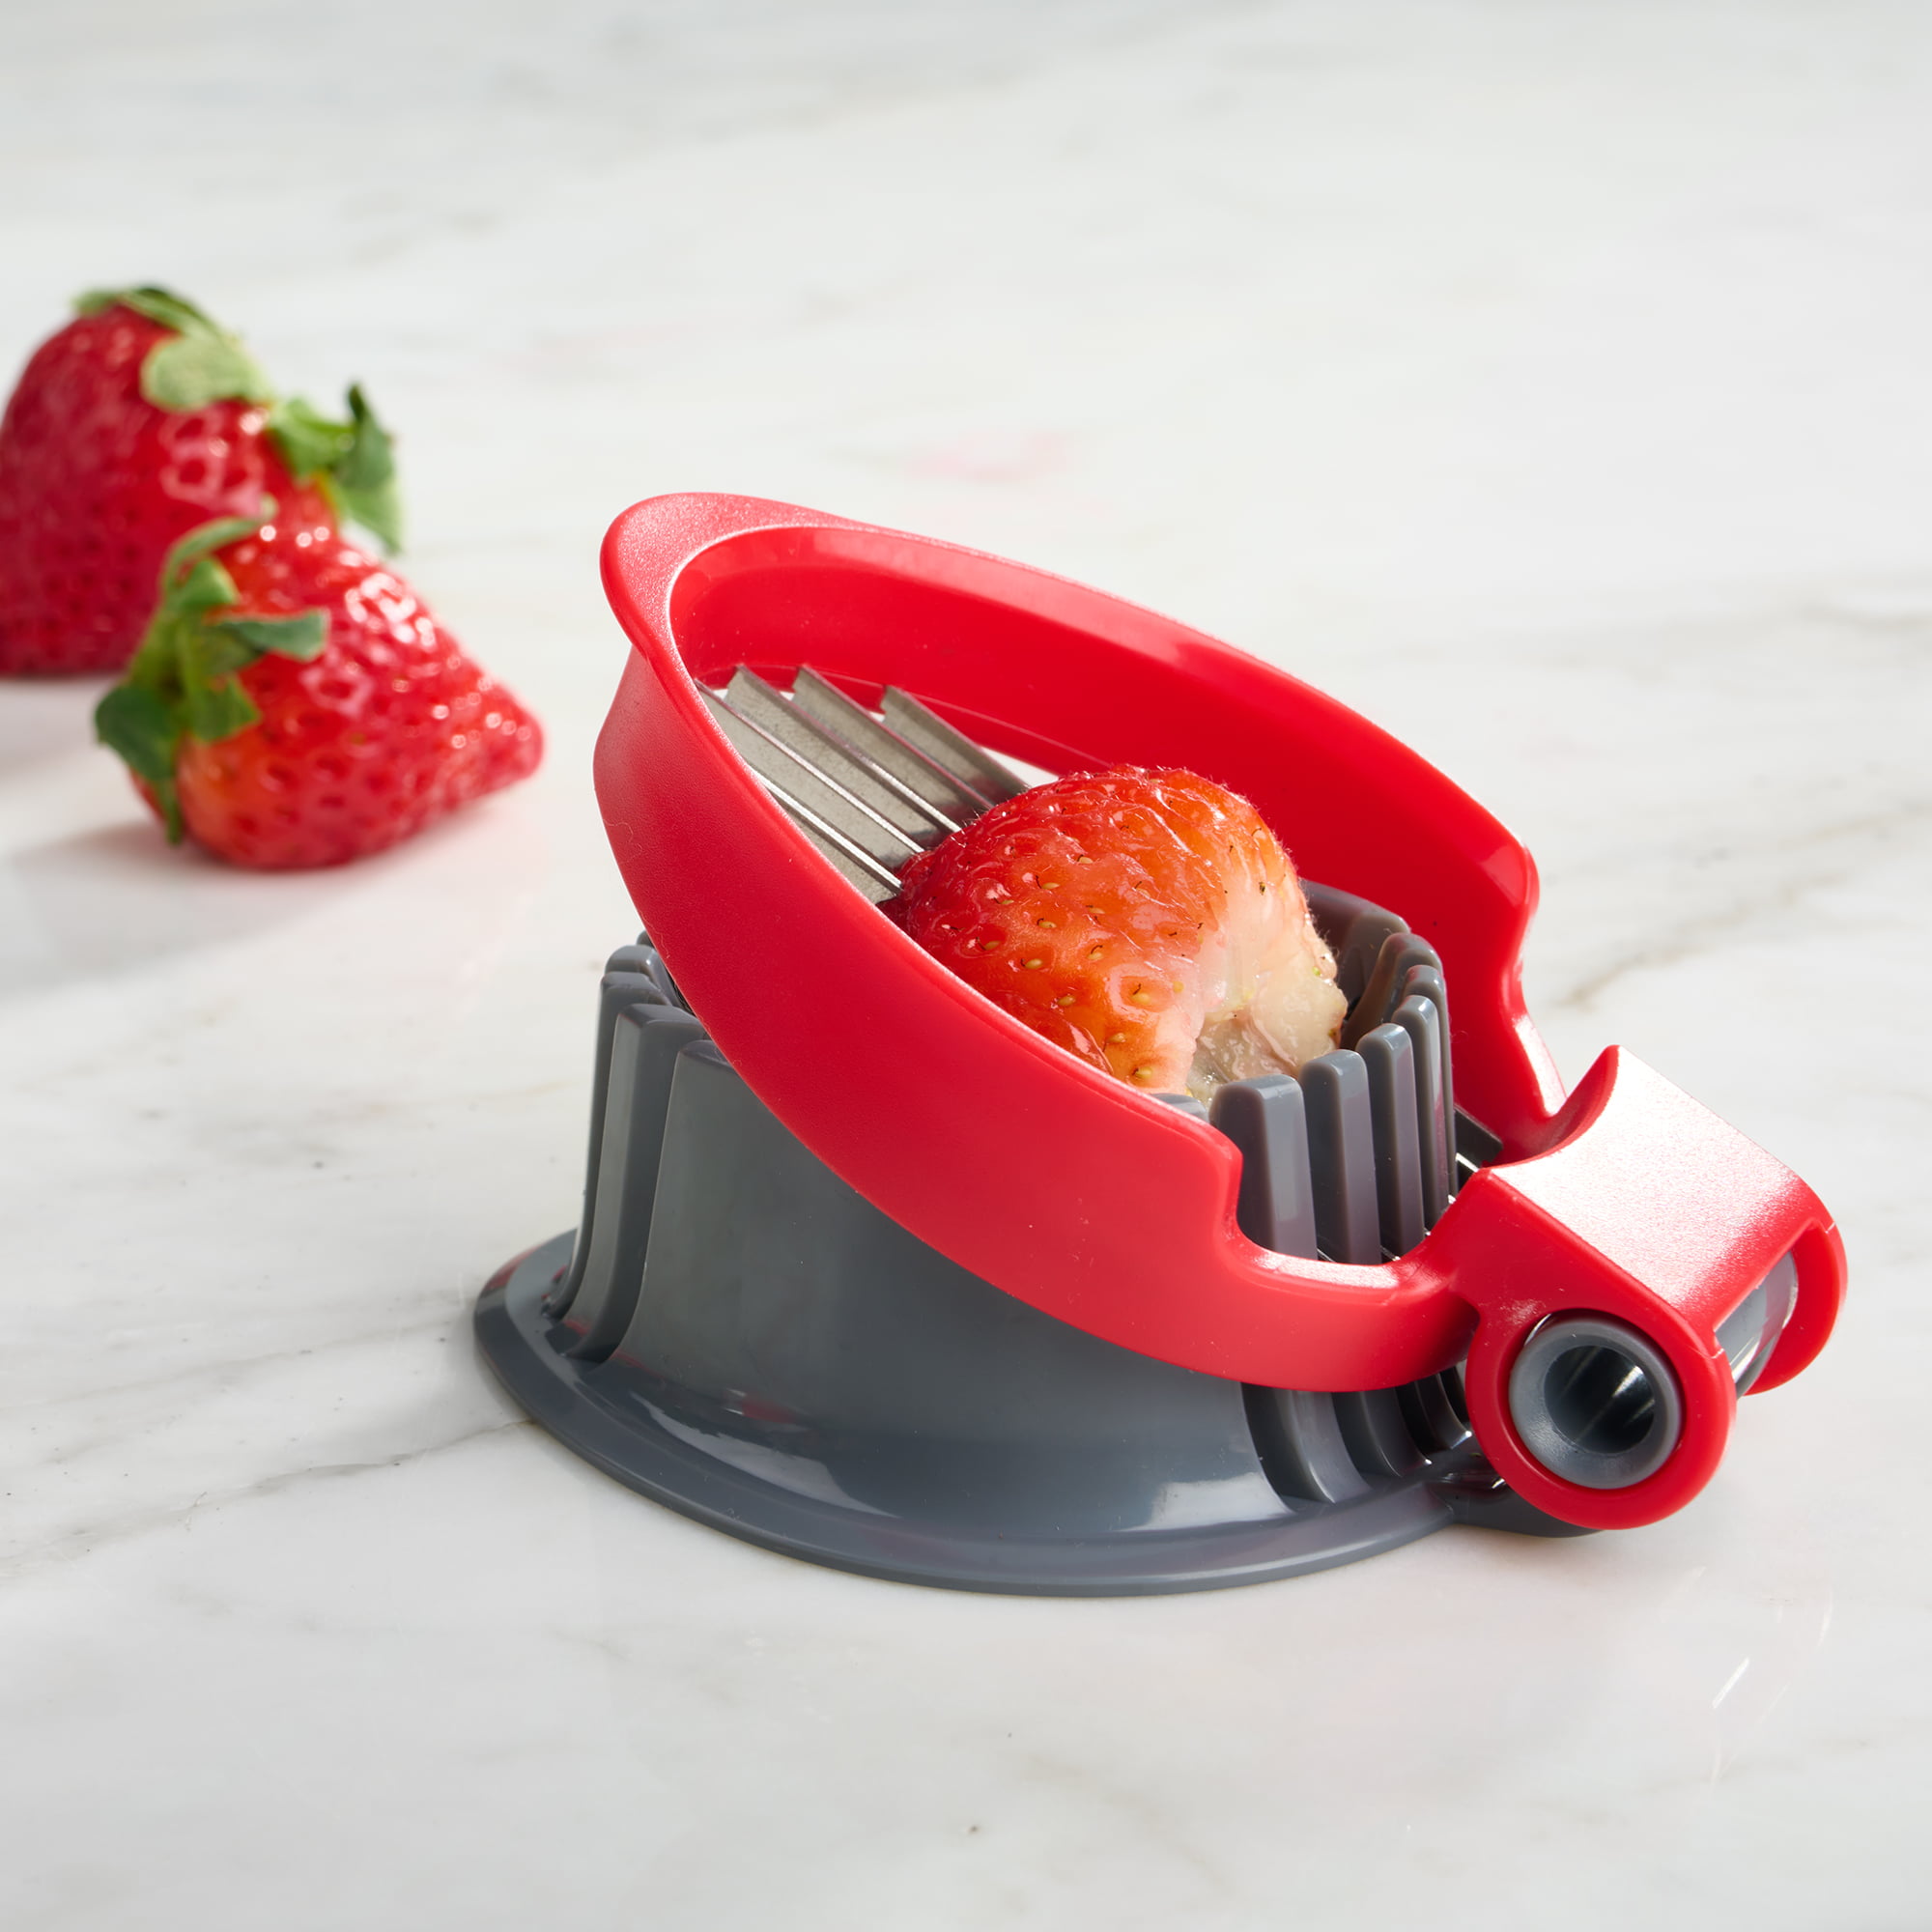 Fusionbrands Pushberry 2-in-1 Strawberry Huller & Slicer Tool, Red